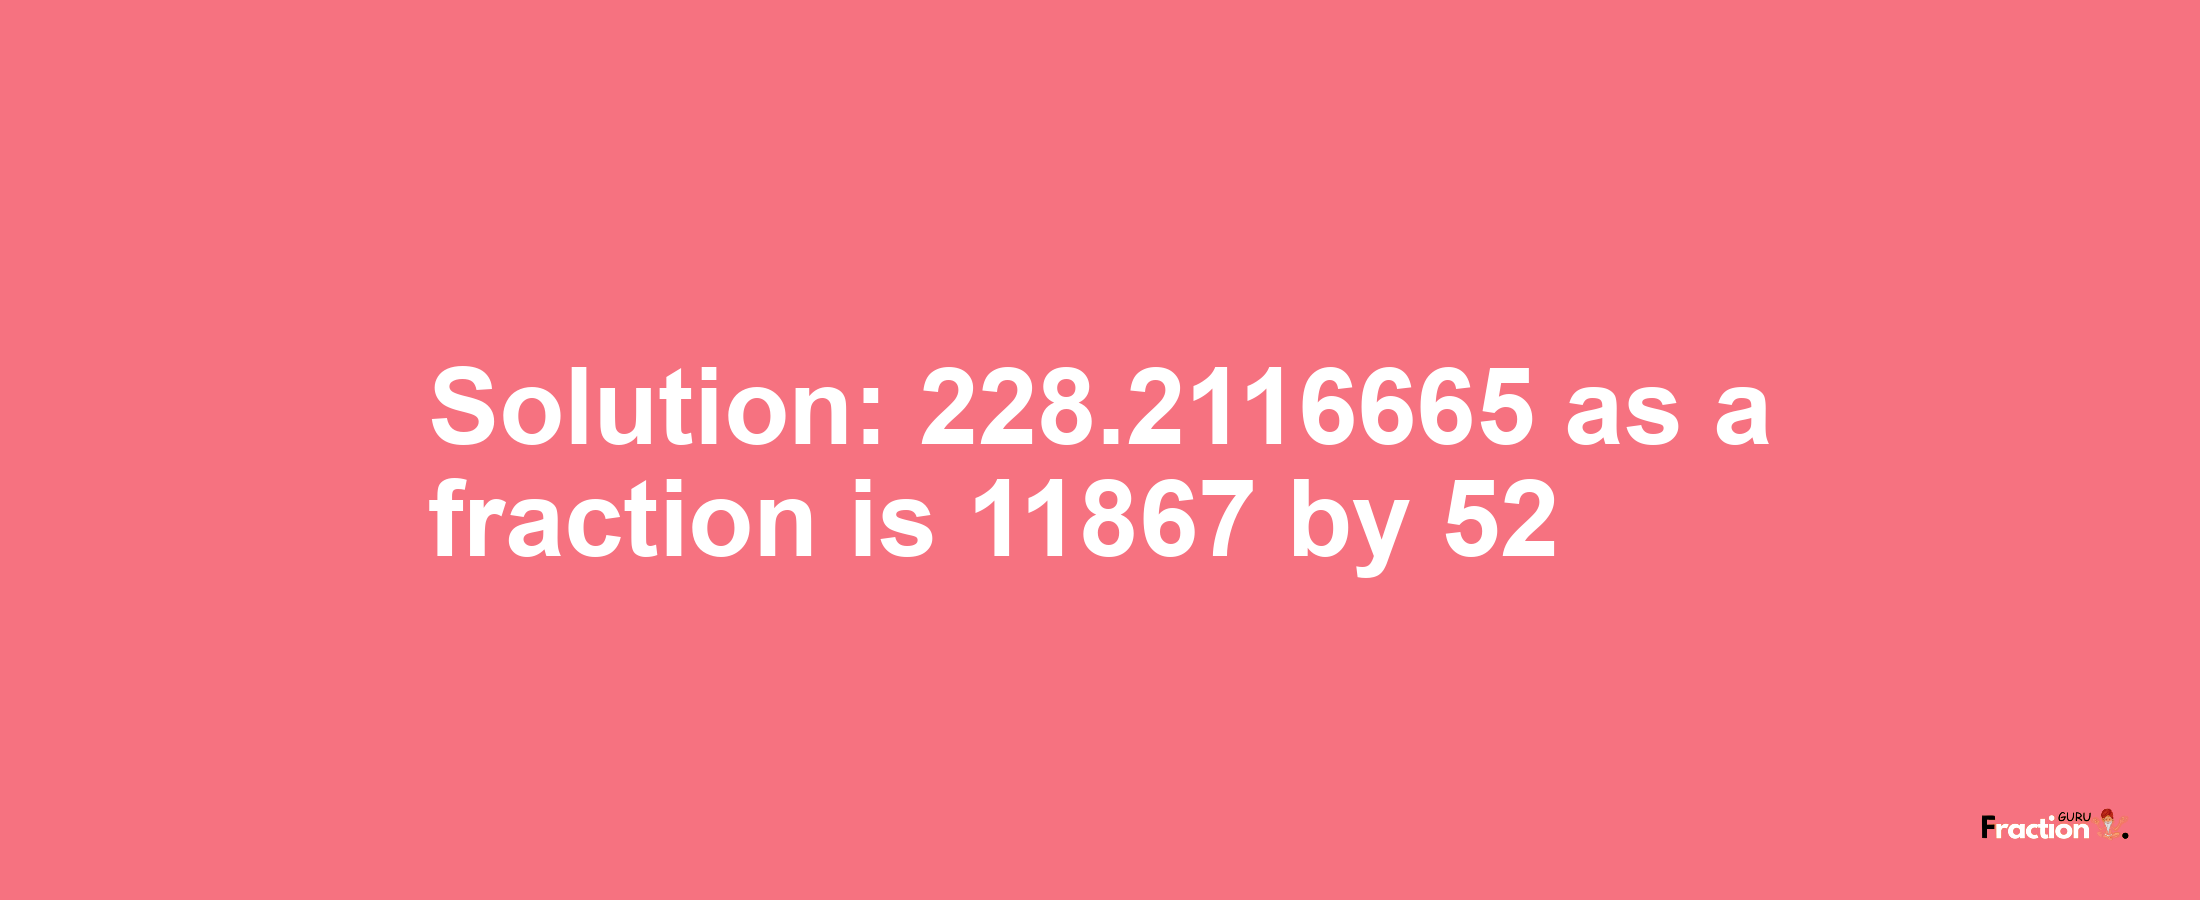 Solution:228.2116665 as a fraction is 11867/52